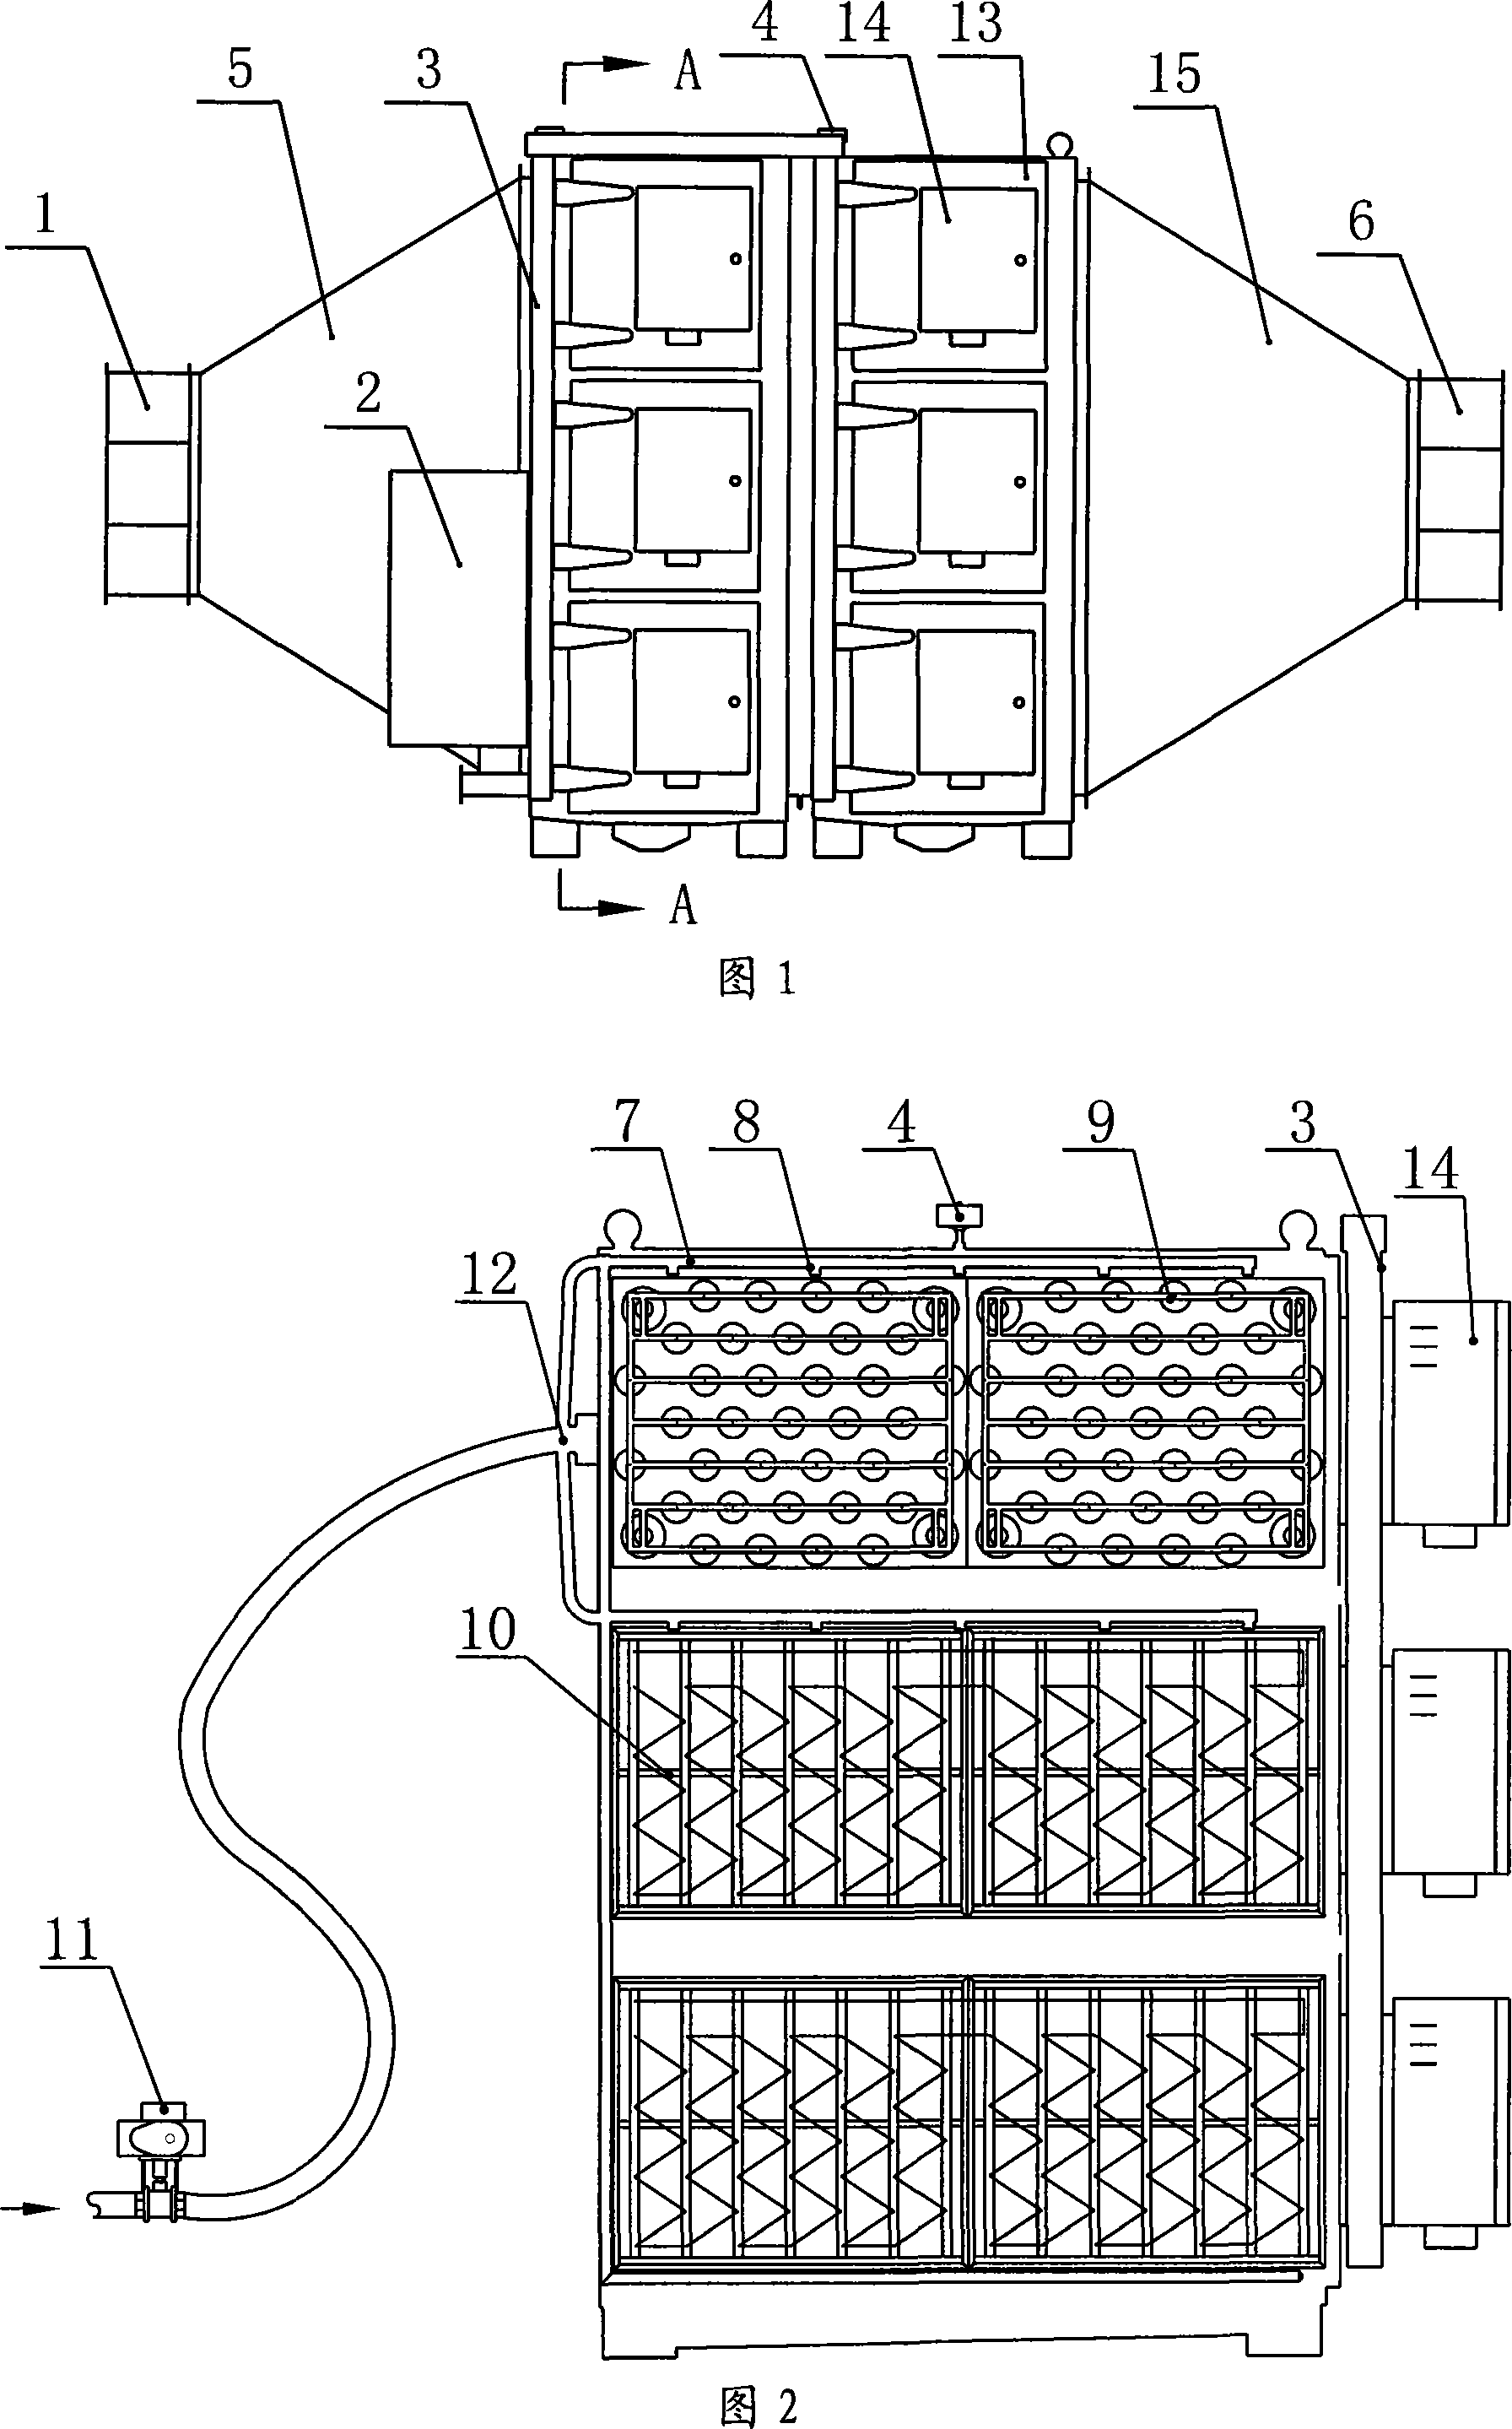 Electrostatic type fume cleaning equipment with fire-fighting mechanism